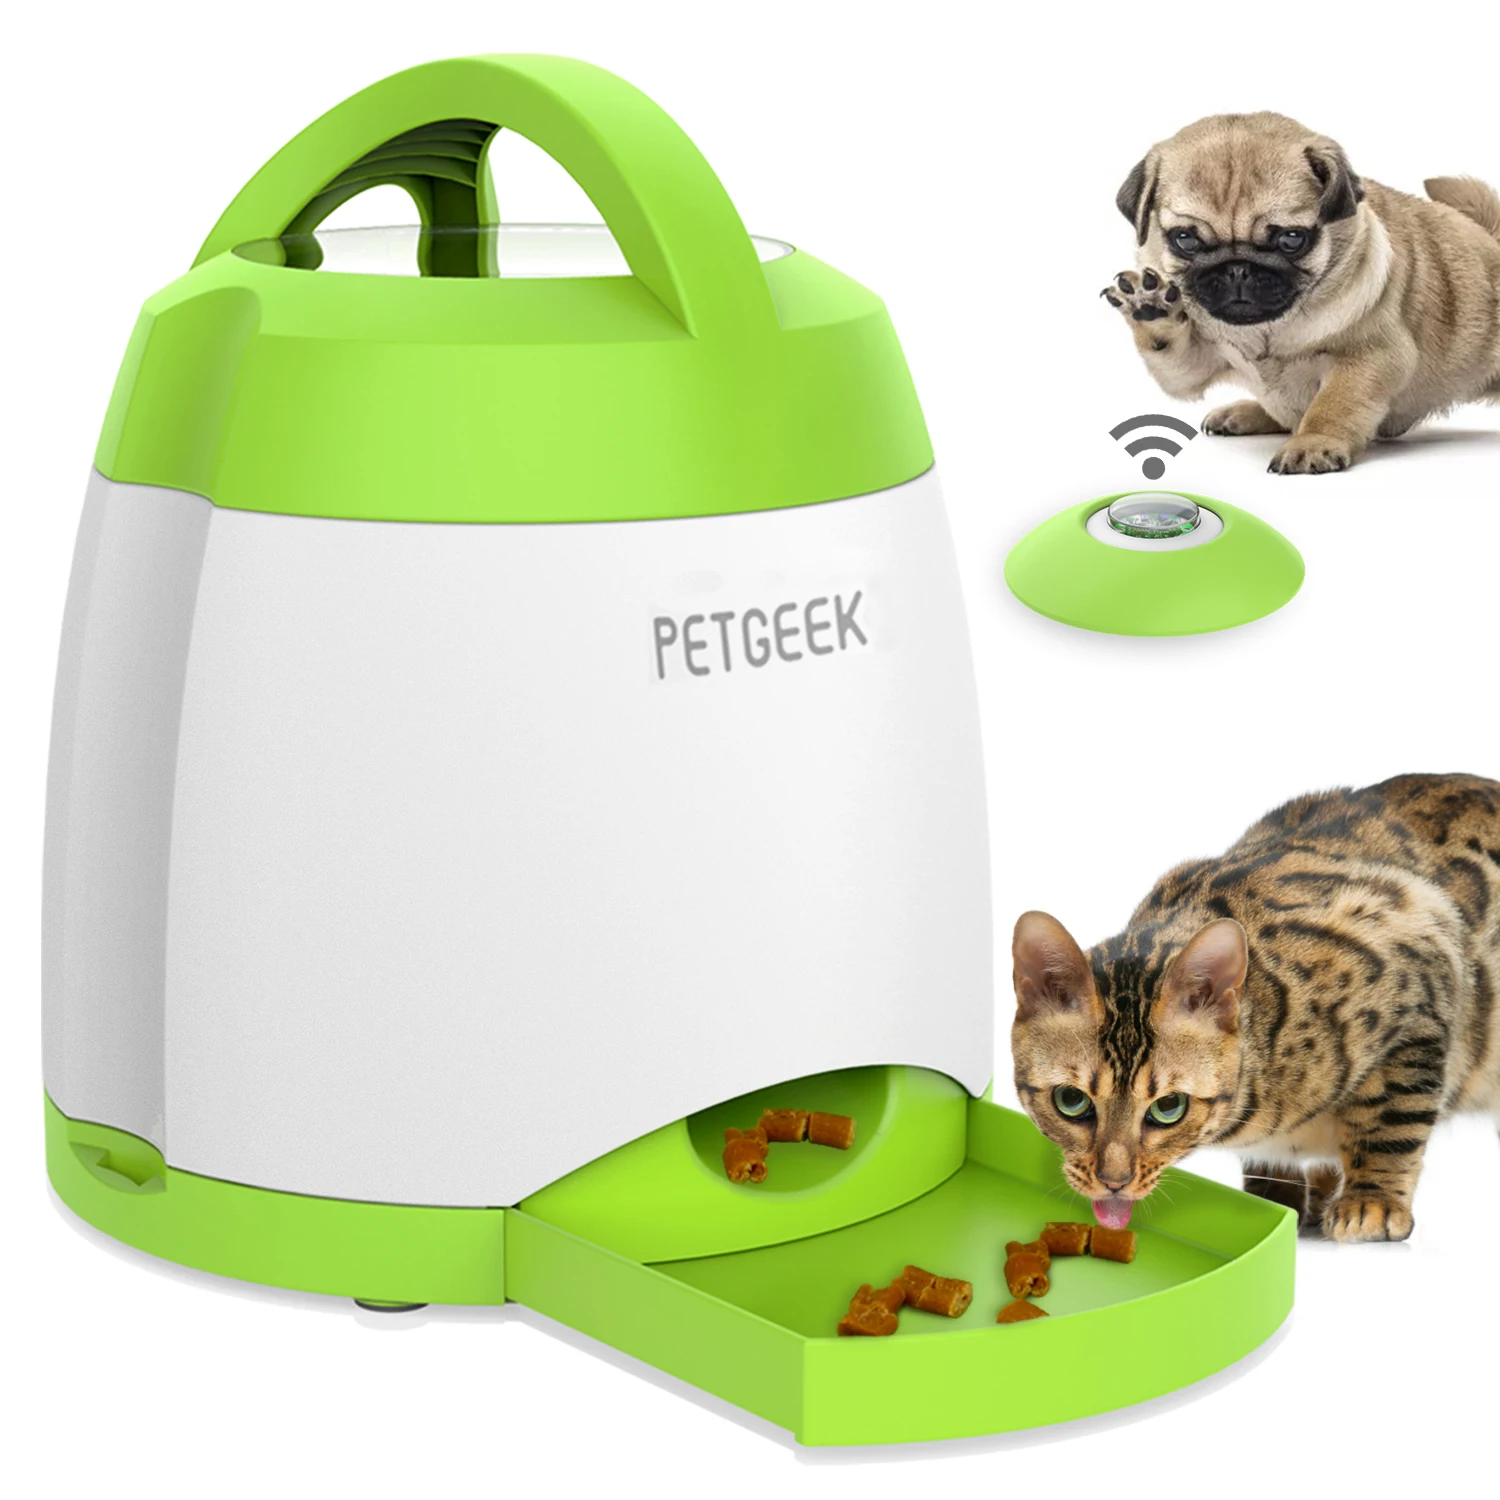  PETGEEK Automatic Dog Treat Dispenser, Dog Puzzle Memory  Training Activity Toy- IQ Training Automatic Dog Cat Feeder Toy, Remote Dog Button  Treat Dispenser for Dogs : Pet Supplies